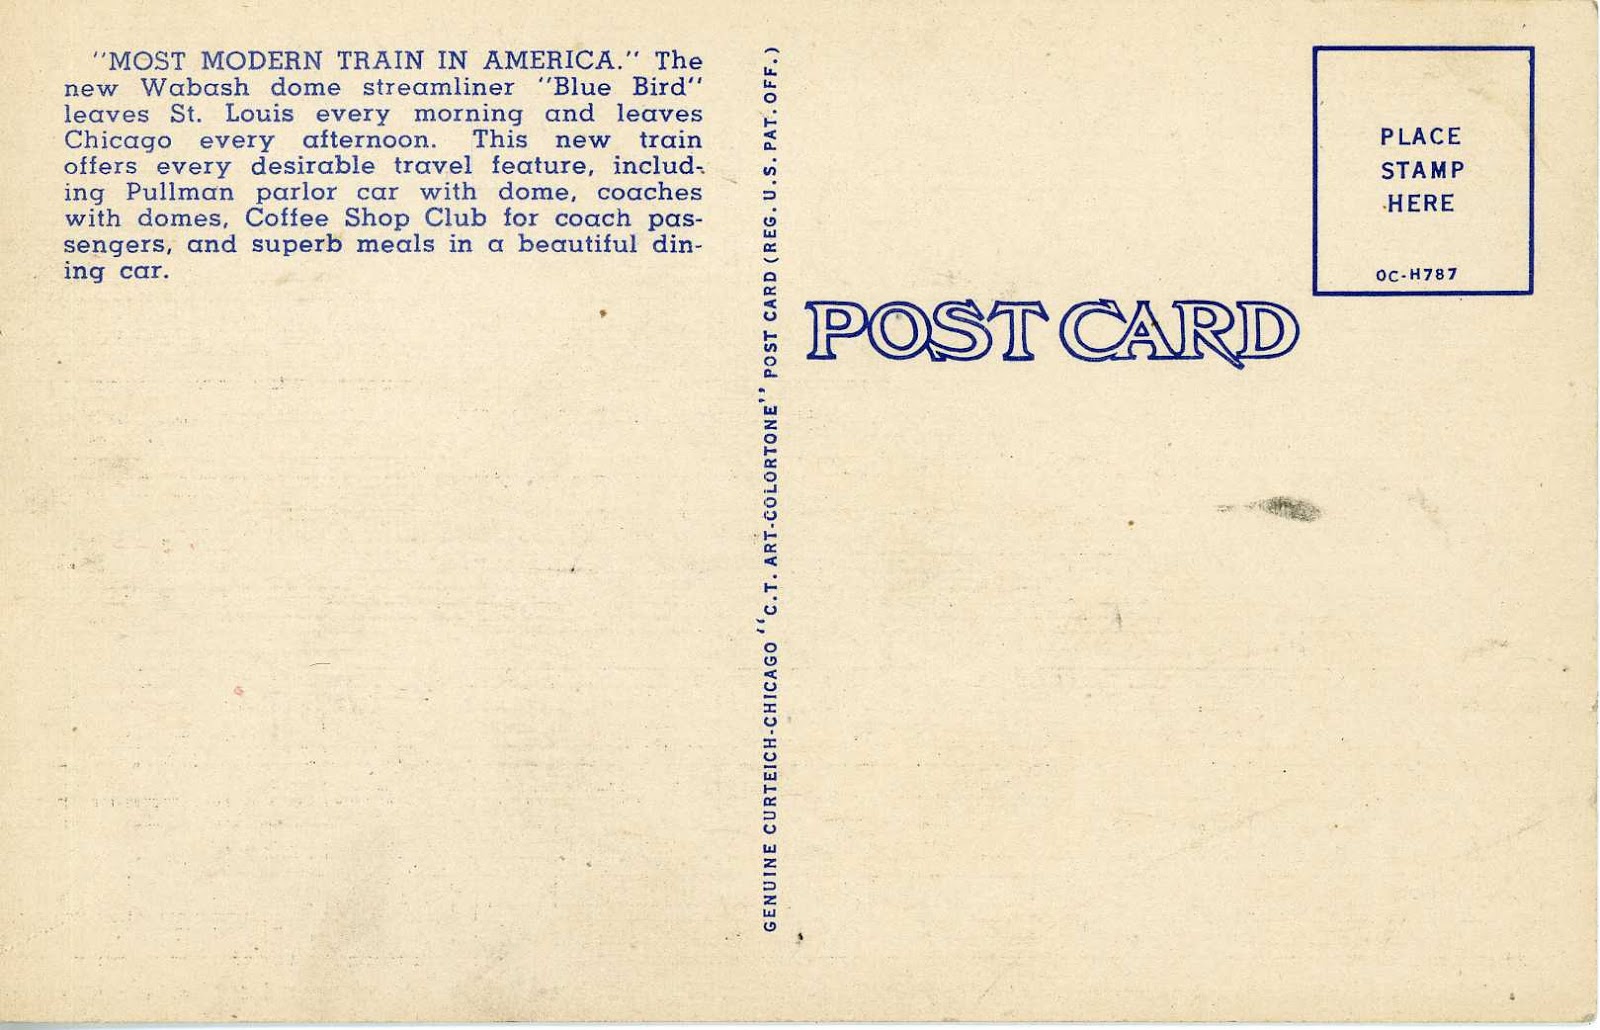 The National Railroad Postcard Museum